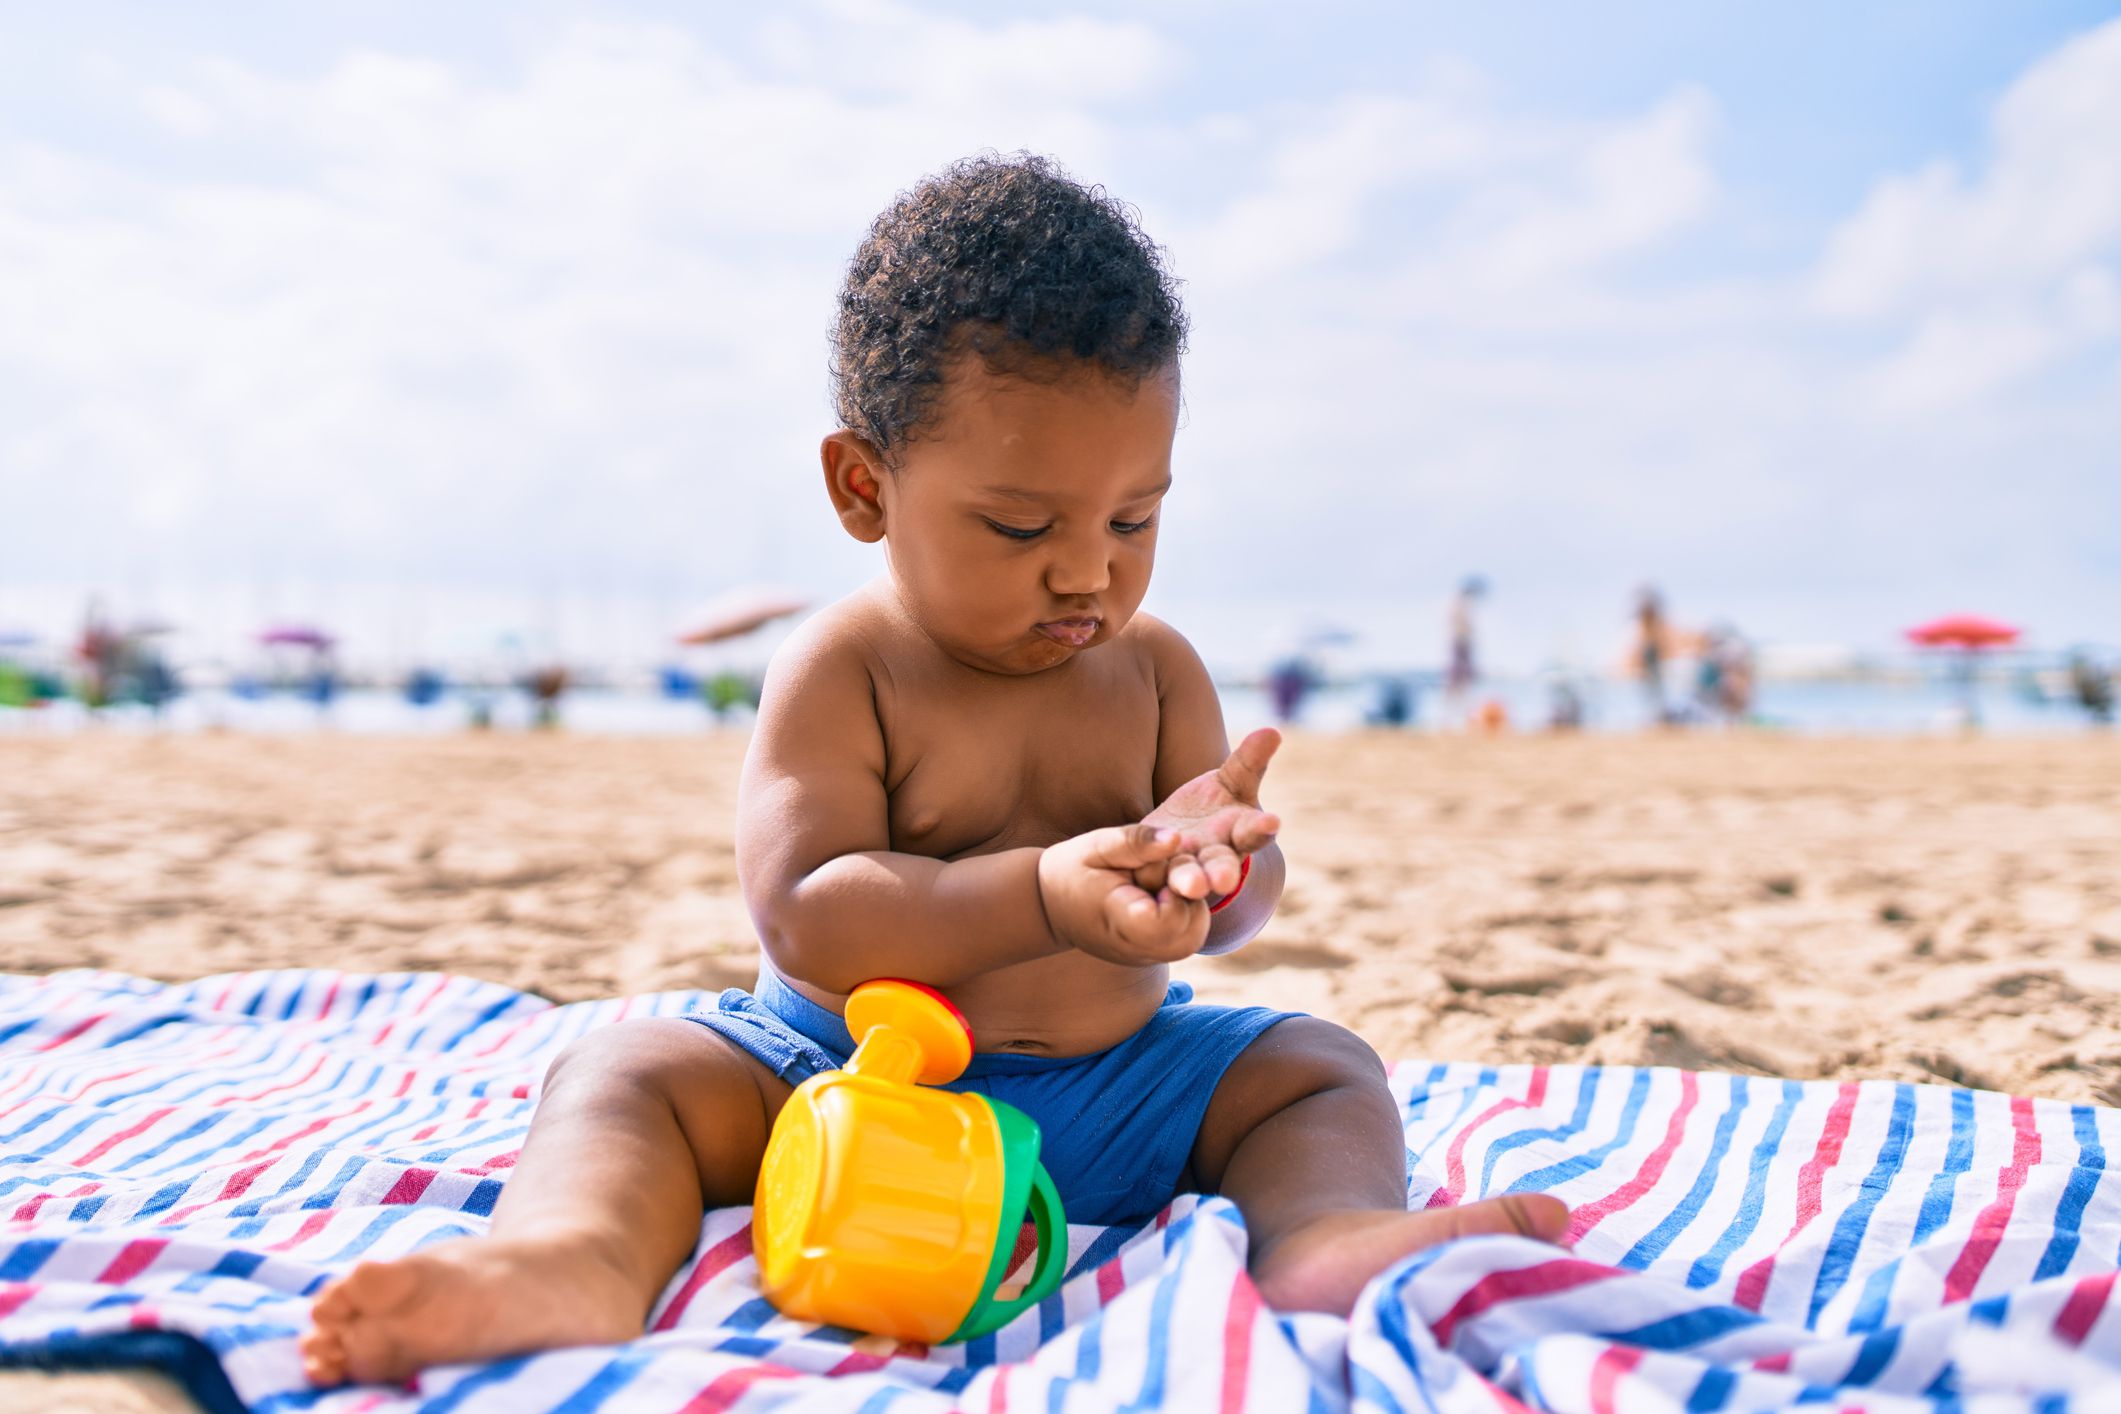 <p>When traveling, think of your baby as a mini-version of you, and take all precautions (and then some) that you’d take for yourself. For <a href="https://www.sofi.com/learn/content/summer-travel-tips/">summer travel</a> in warm climates, apply mosquito repellant, use plenty of sunscreen (don’t forget to reapply!), and dress them in long-sleeved rash guards while swimming or on the beach. In new countries, avoid tap water.</p><p>Consider nap times, and where you’d like to be to help facilitate your baby falling asleep in a strange environment. Finally, be prepared to adjust your plan as you go to accommodate any fussiness and meltdowns.</p>